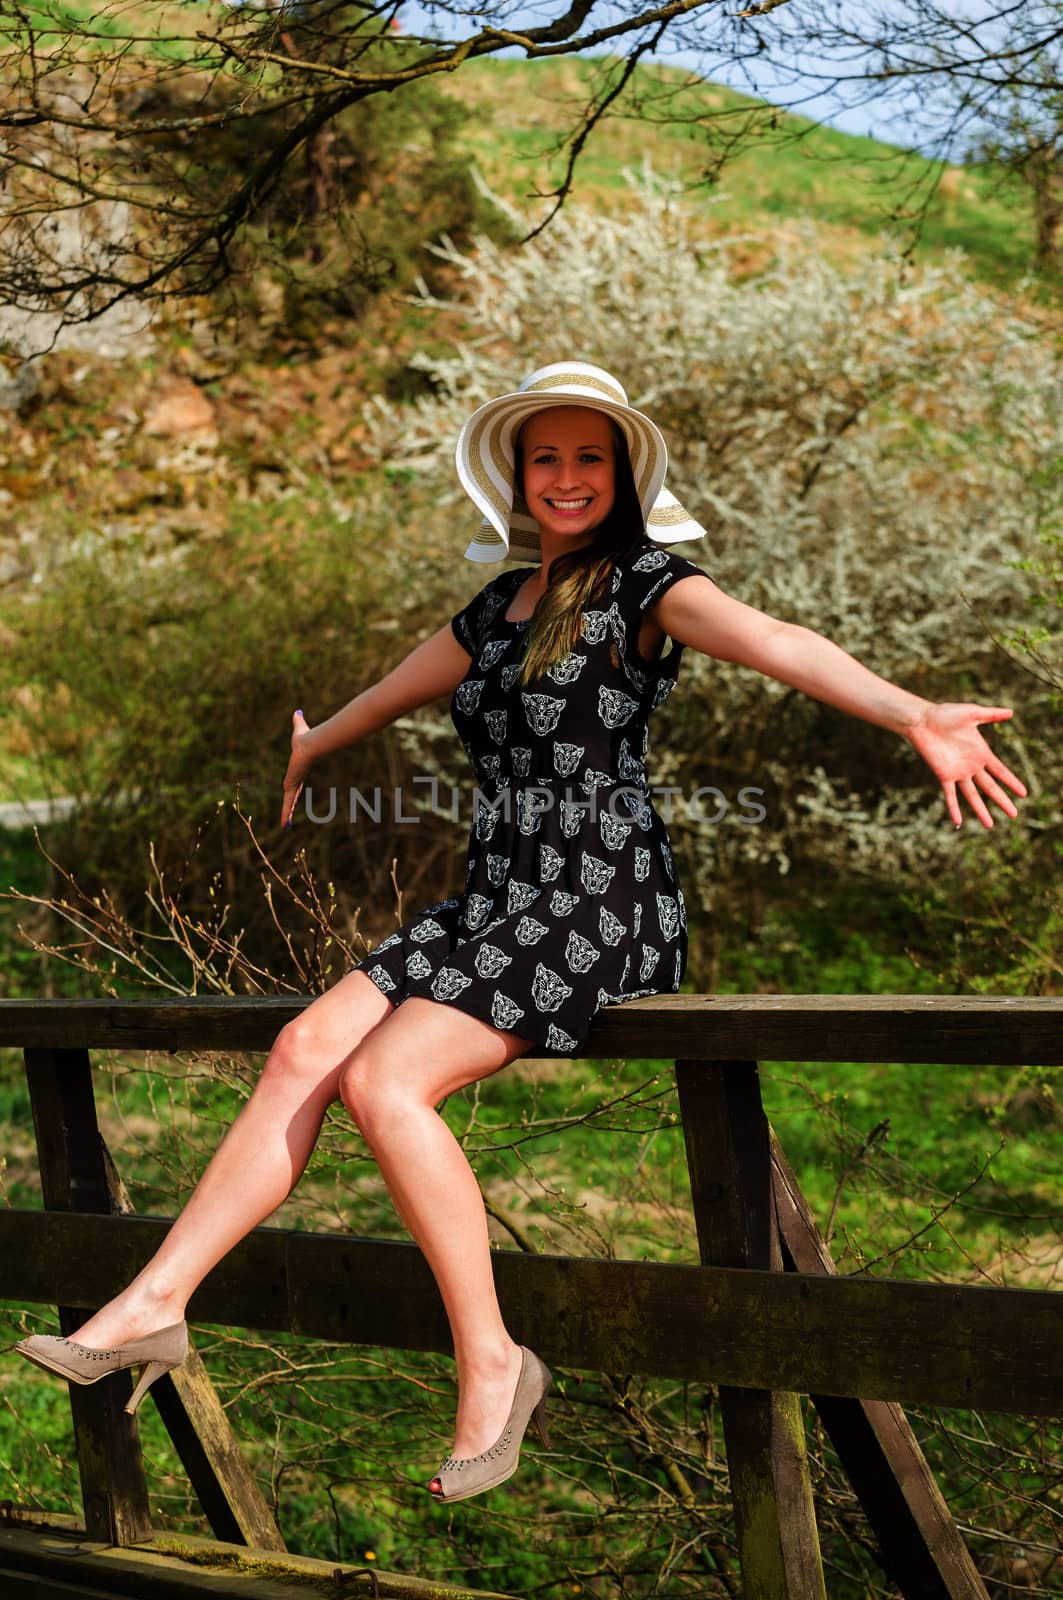 Cheerful fashionable woman in stylish hat and frock posing outdoor. Happy brunette girl with raised hands and smile.